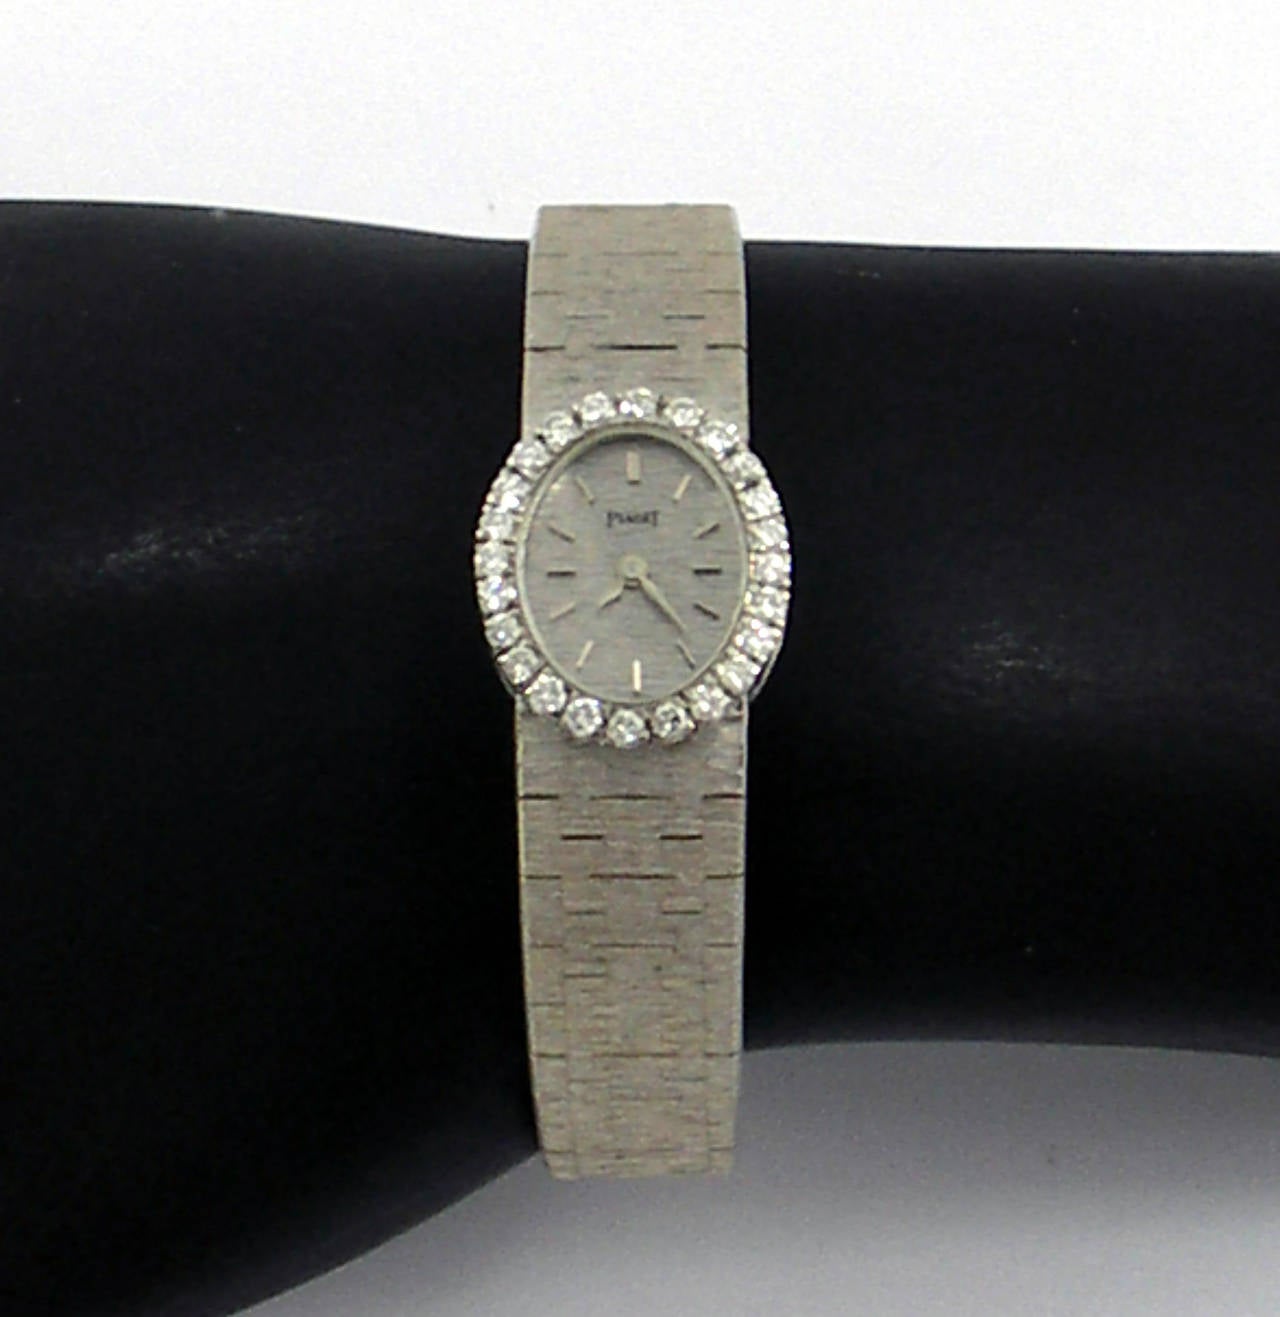 One ladies 18K white gold Piaget wristwatch with a bezel measuring 19mm long, and 16mm wide. The bezel is set with 24 round brilliant cut diamonds, weighing 0.75ct, total approximate weight. The mechanical movement is in excellent condition, and is